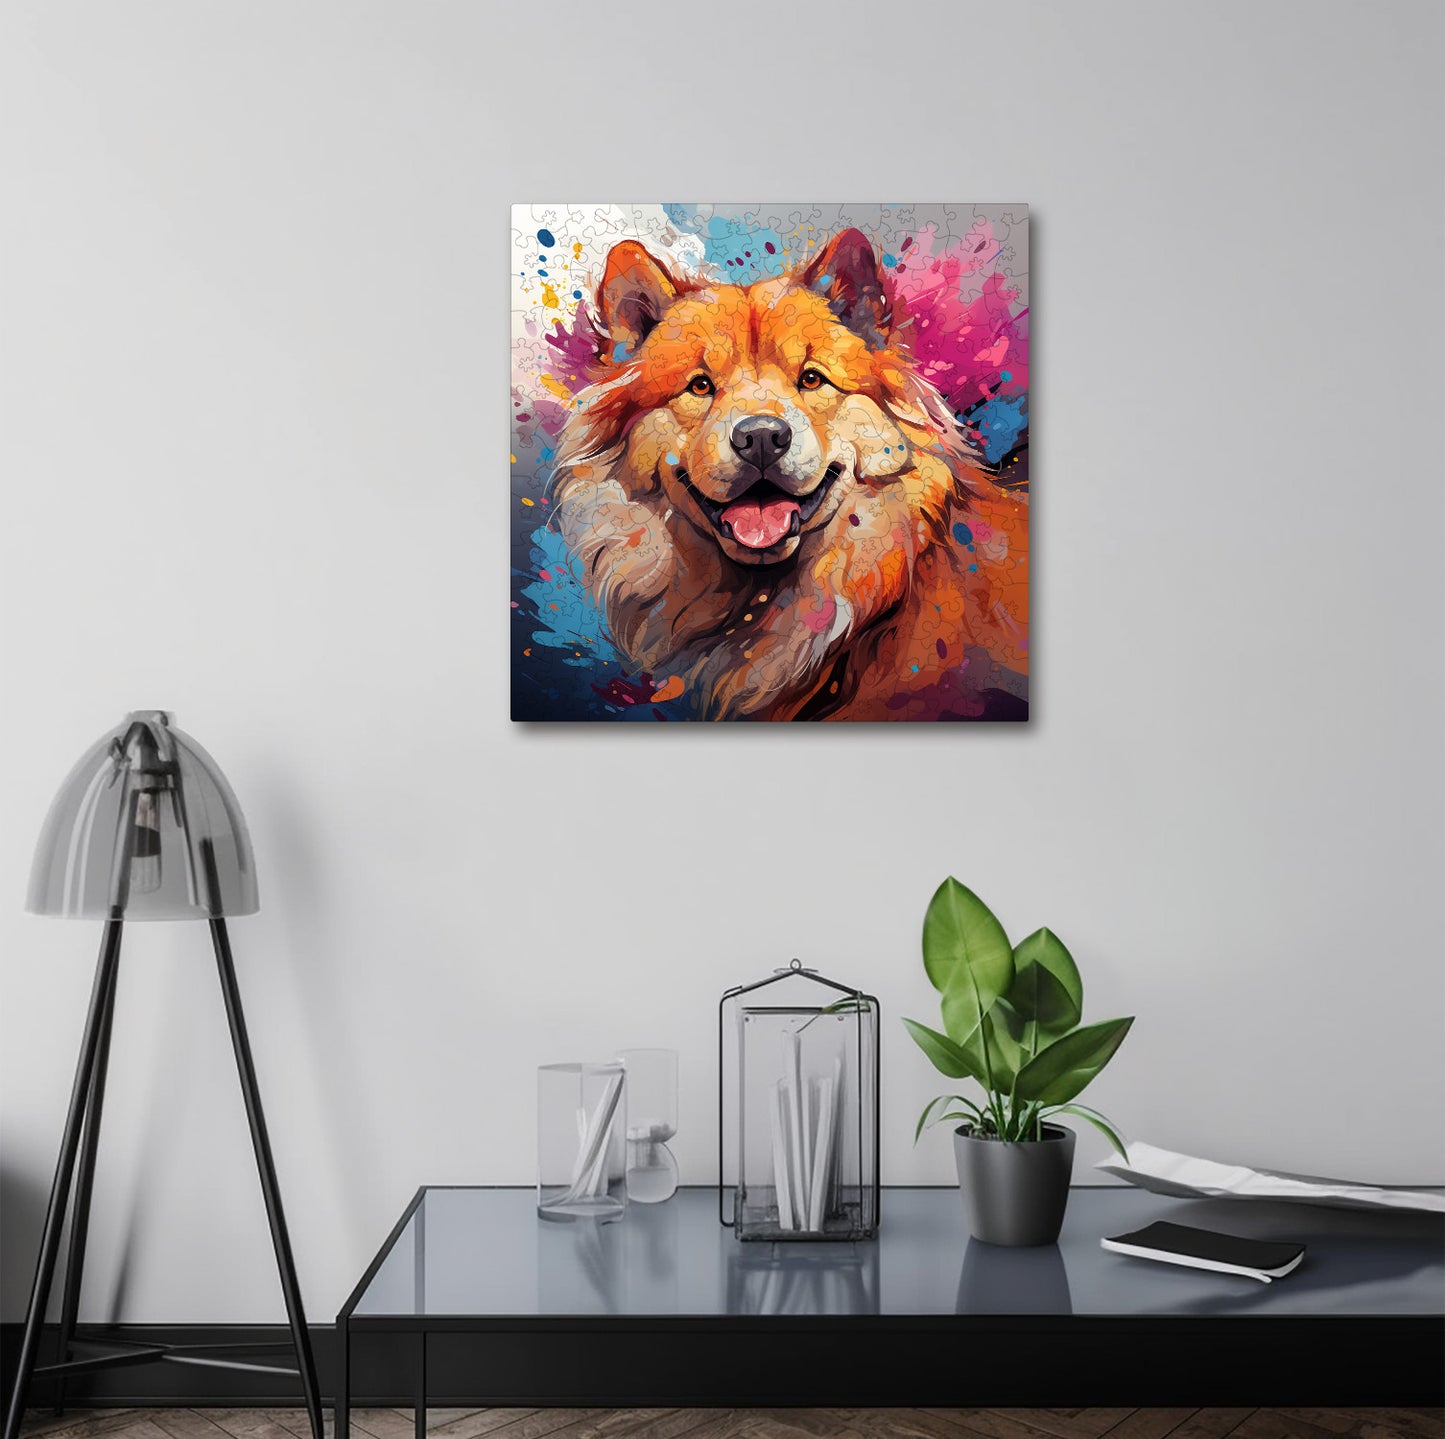 Puzzle cu Animale - Caini - Chow Chow 1- 200 piese - 30 x 30 cm